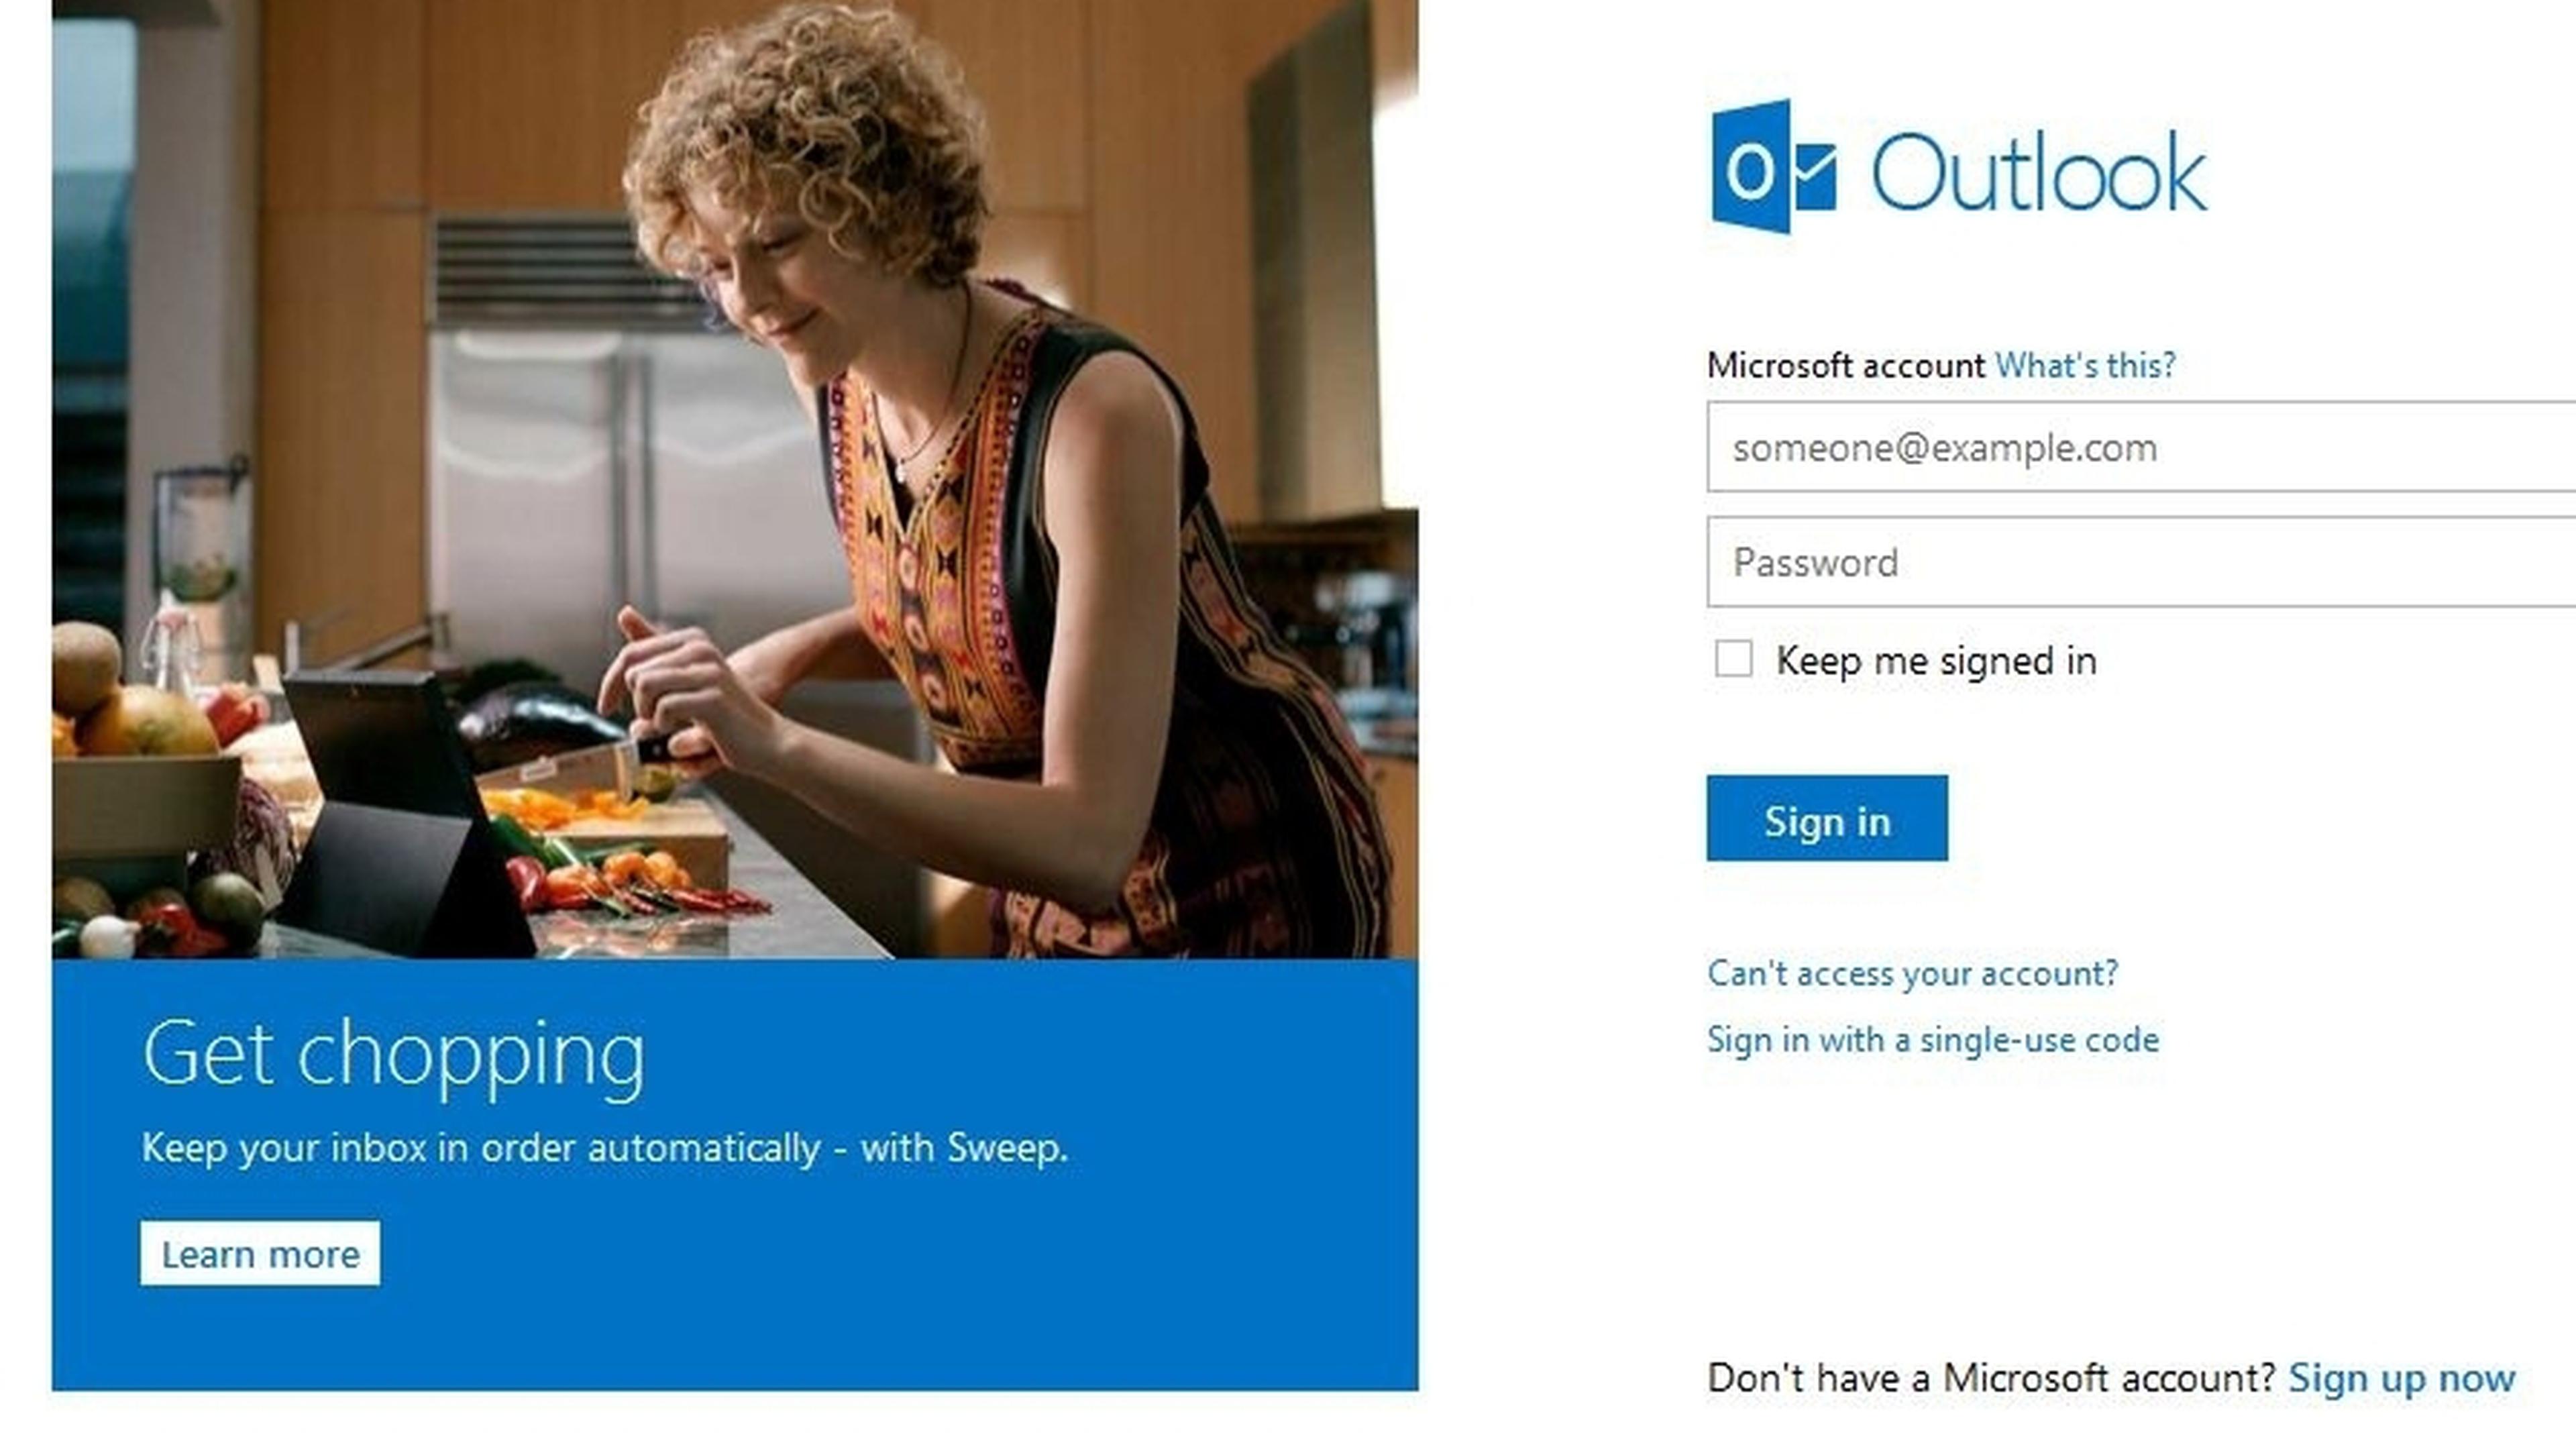 Hotmail is officially dead: Microsoft shifts to Outlook